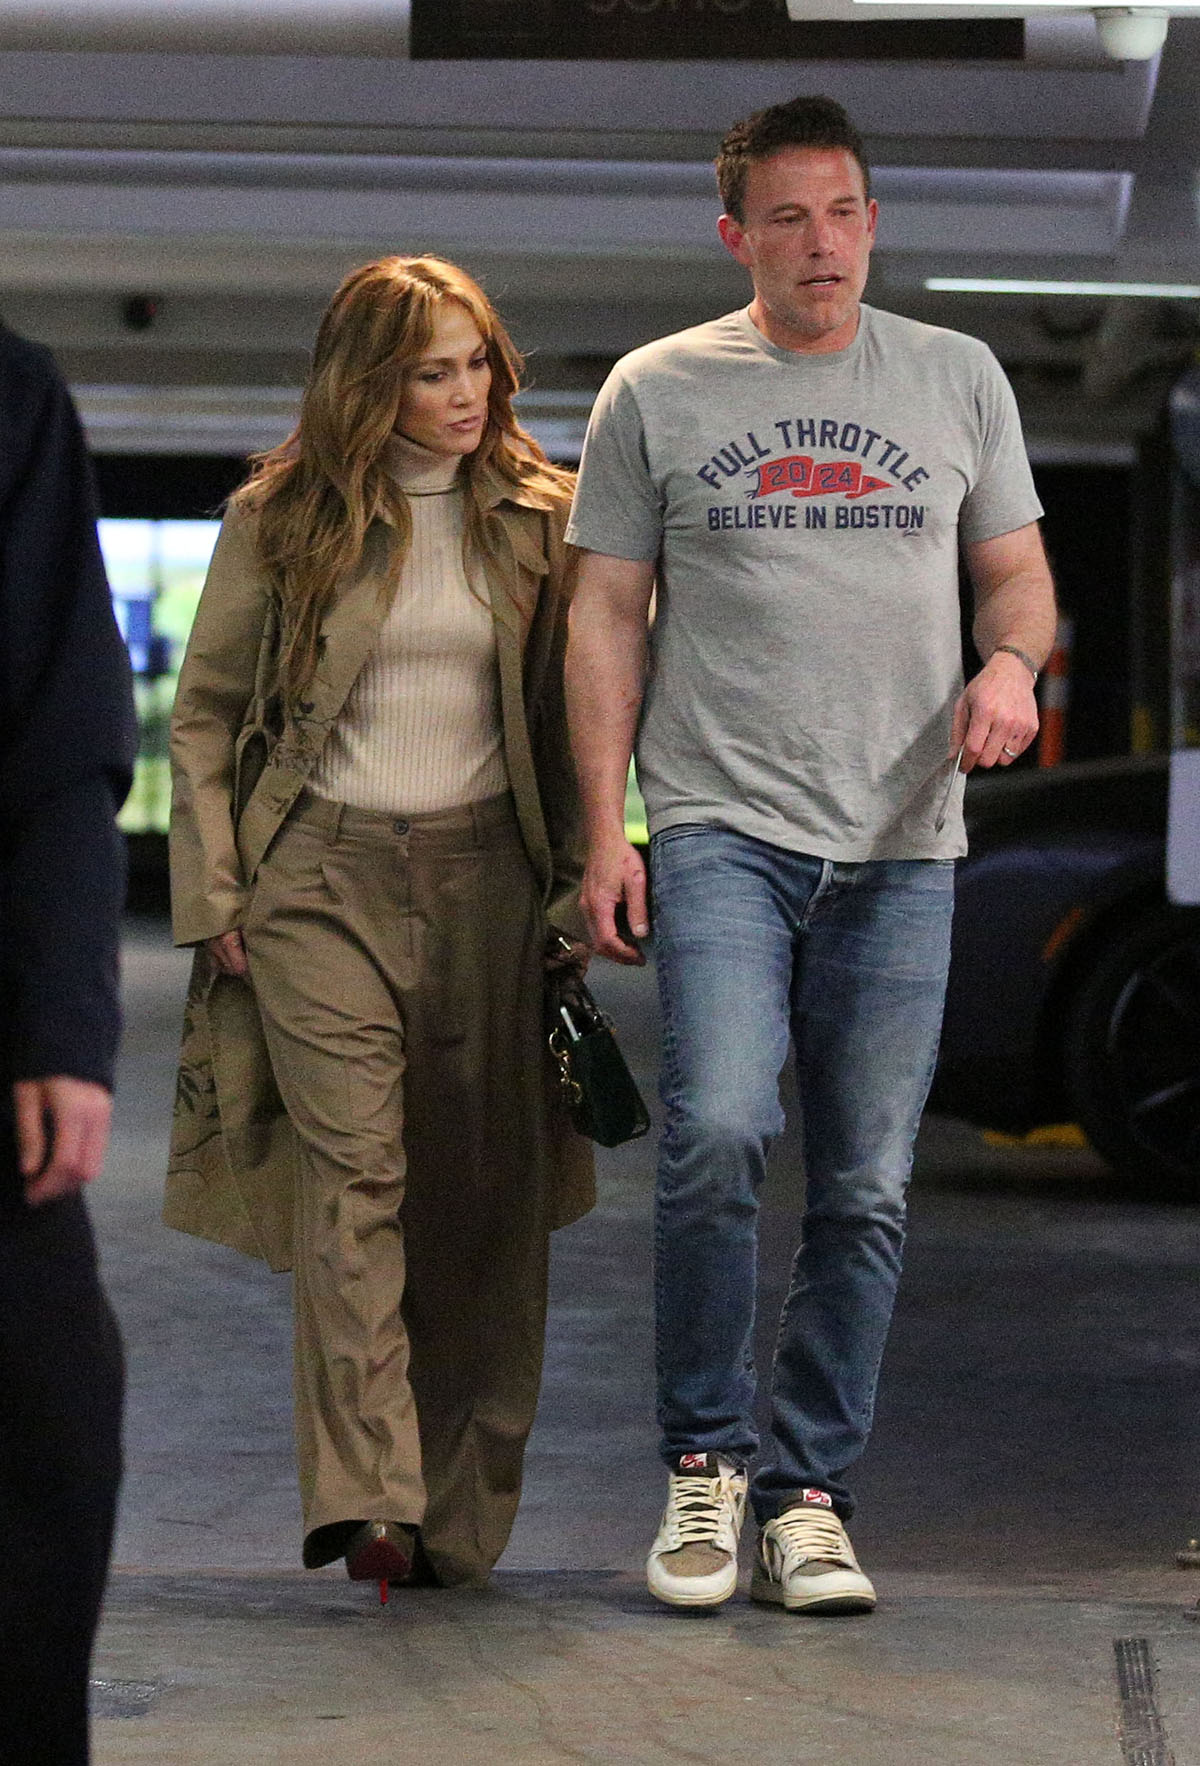 Jennifer Lopez & Ben Affleck Seen Together Again Amid Divorce Talk! They're All Smiles, BUT...